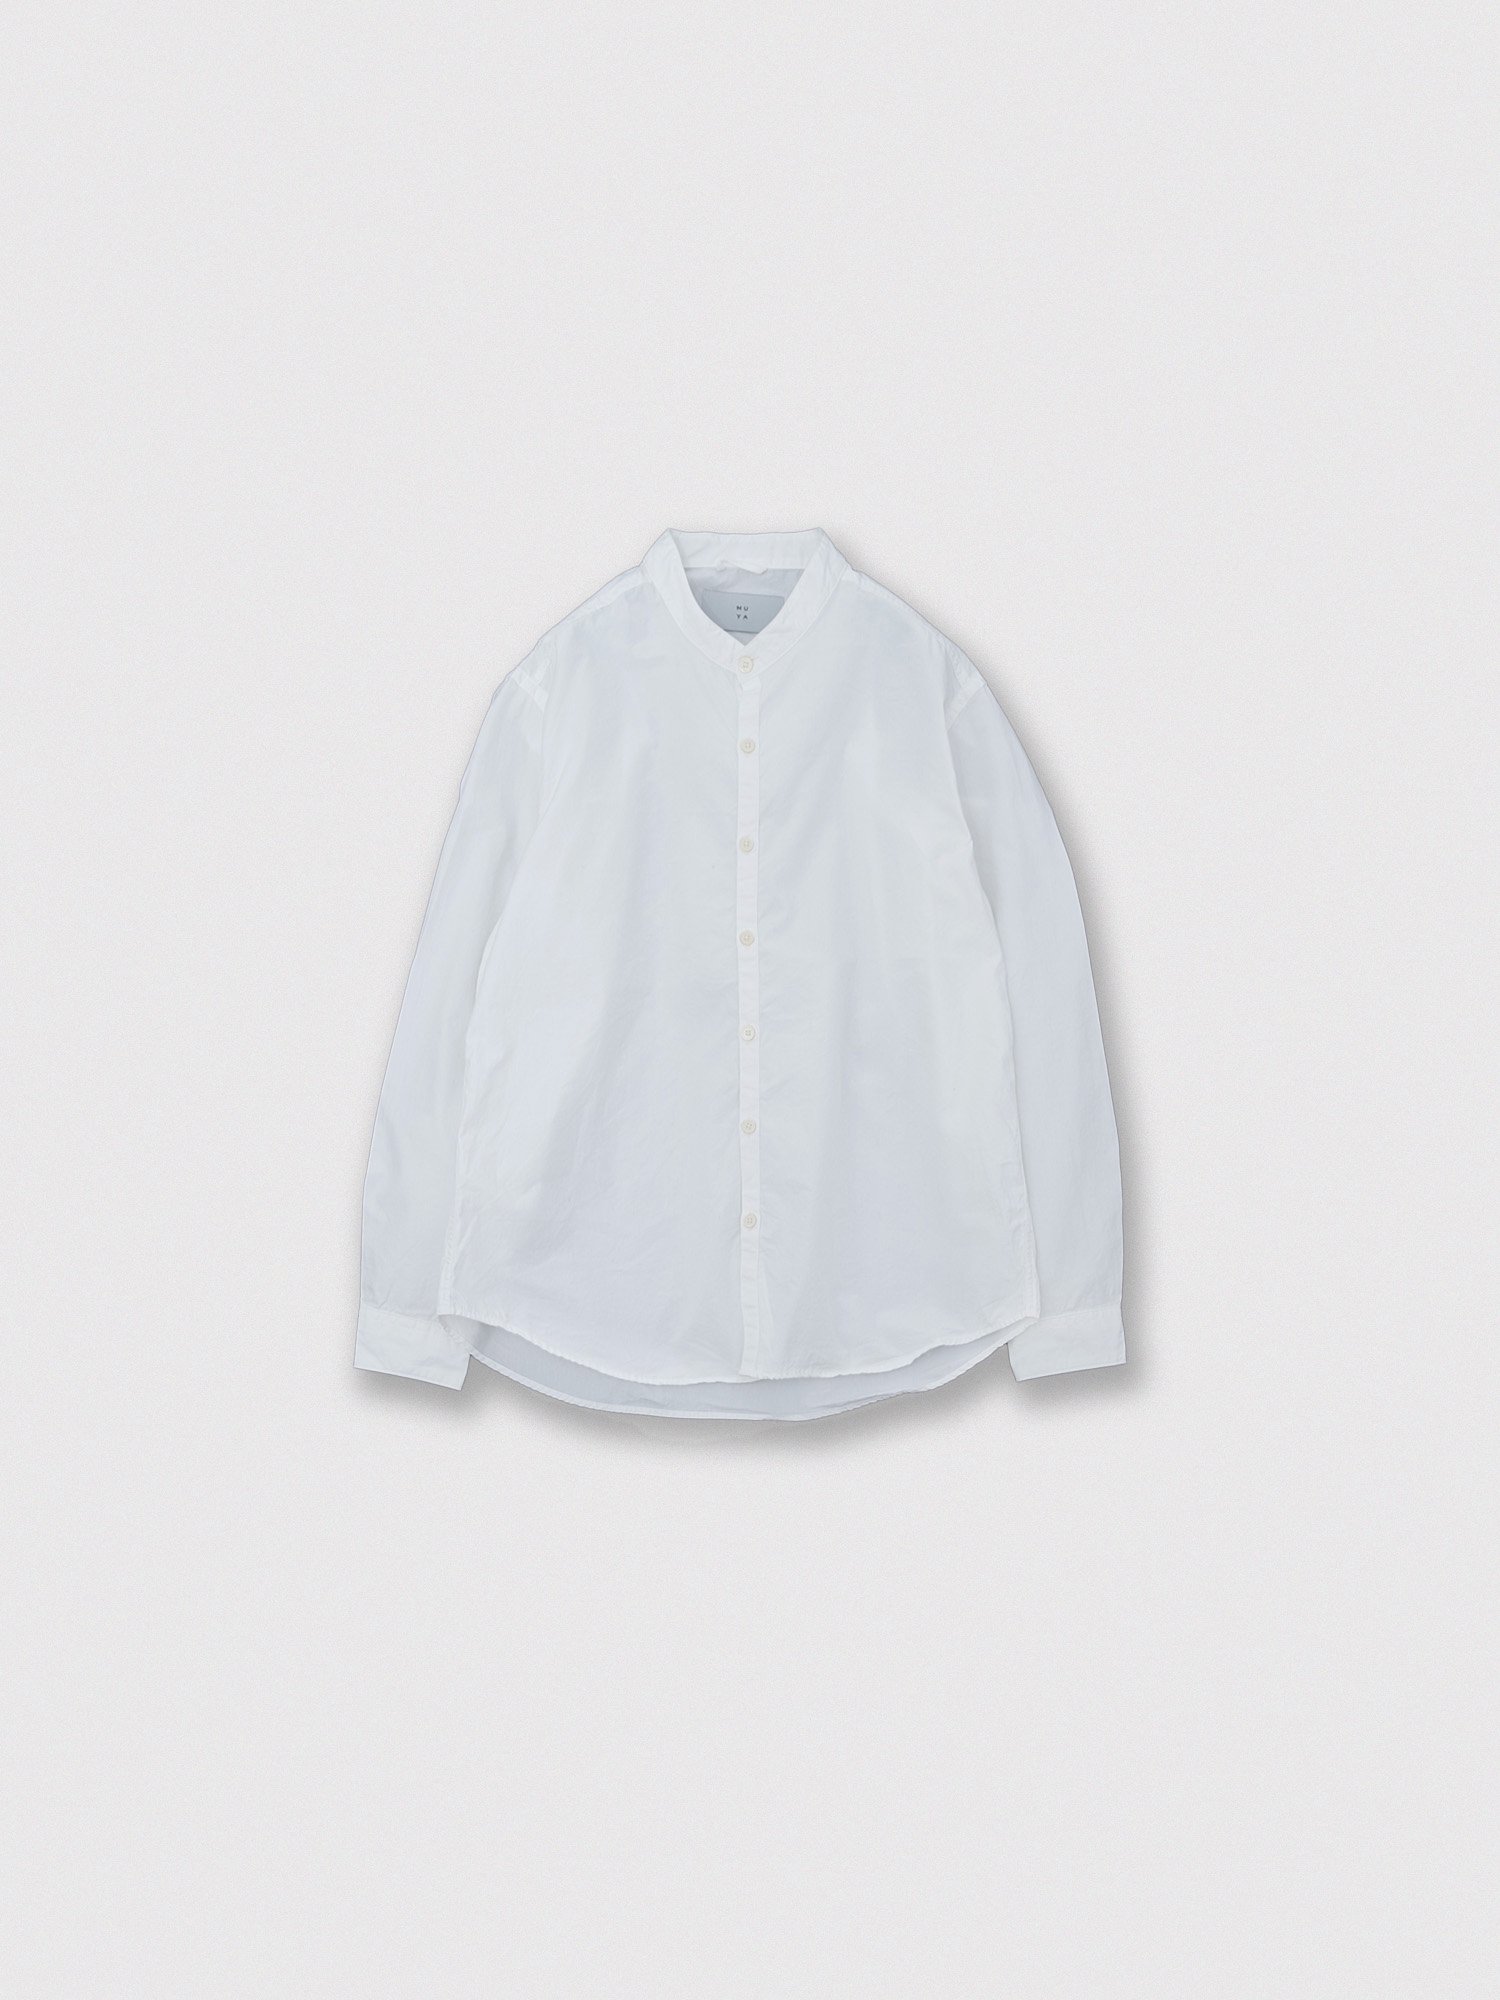 40/1 Atelier shirts relax <br /> stand collar 